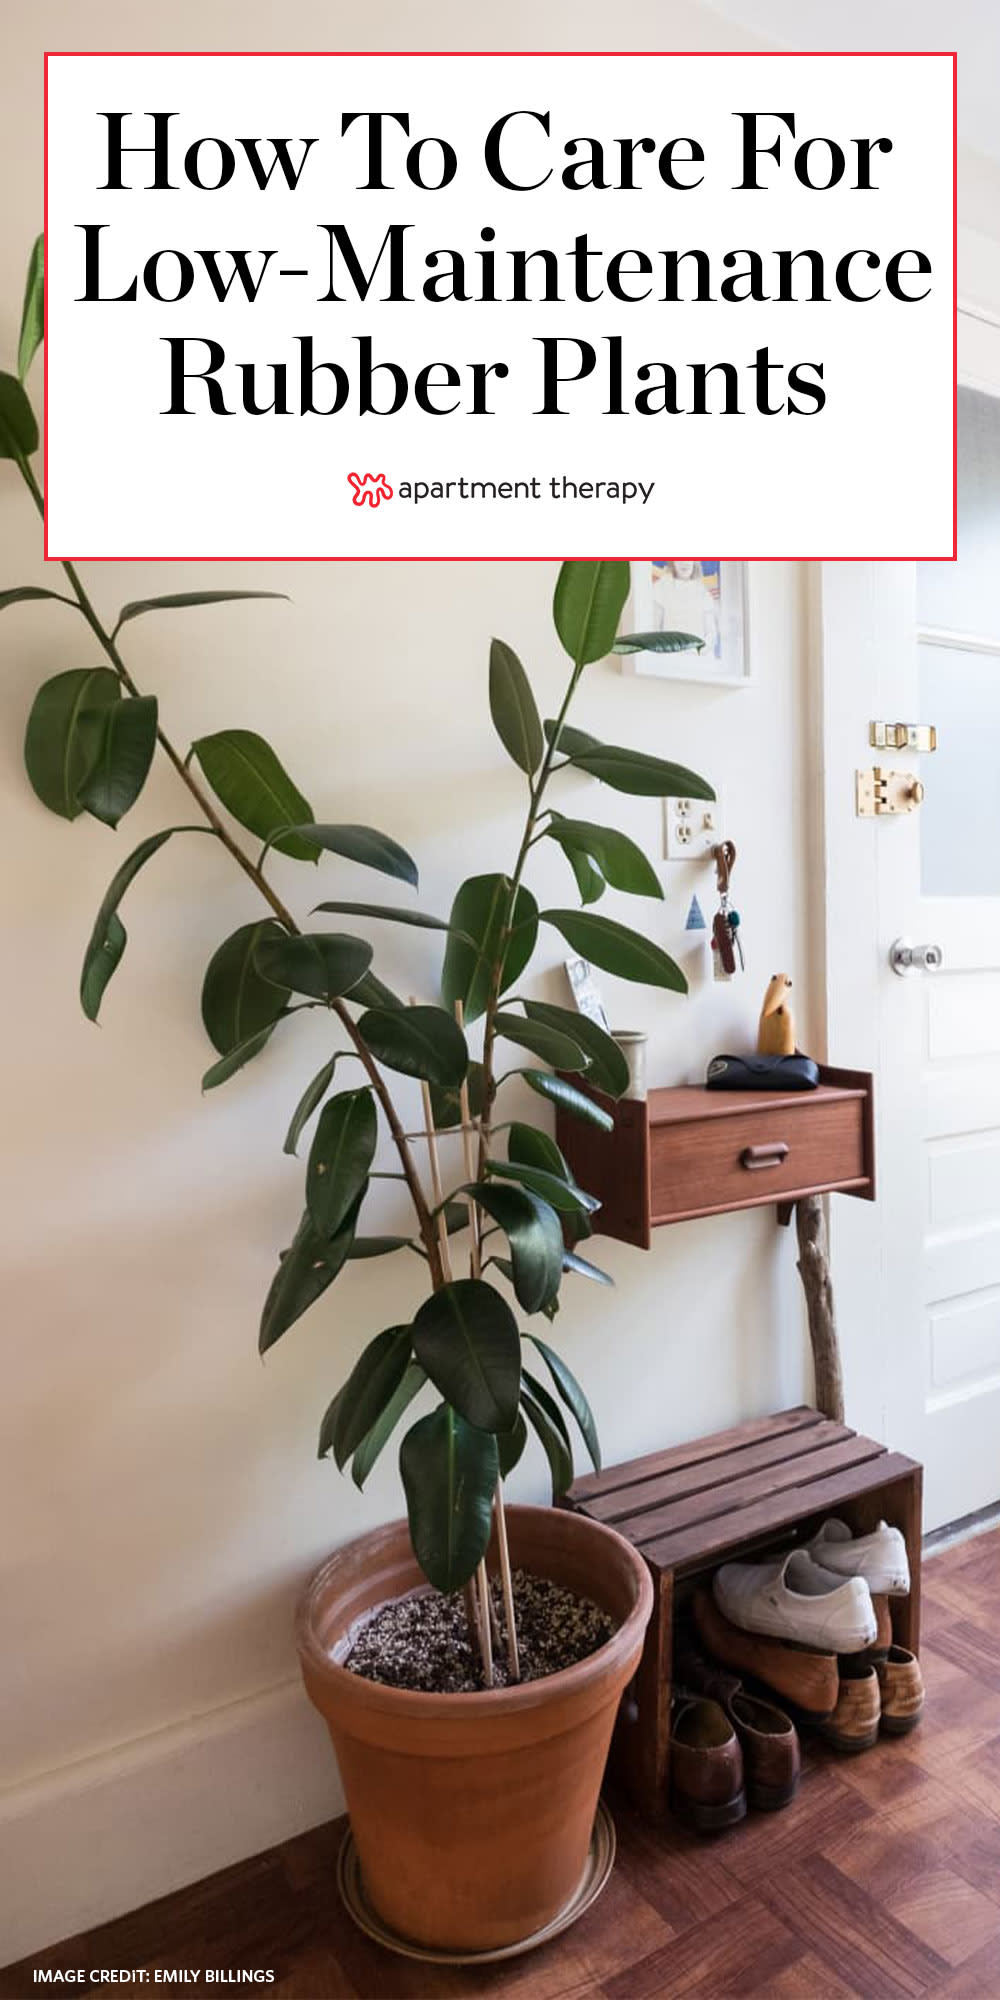 How To Care For A Rubber Tree Plant Outdoors - Frank And Zoey